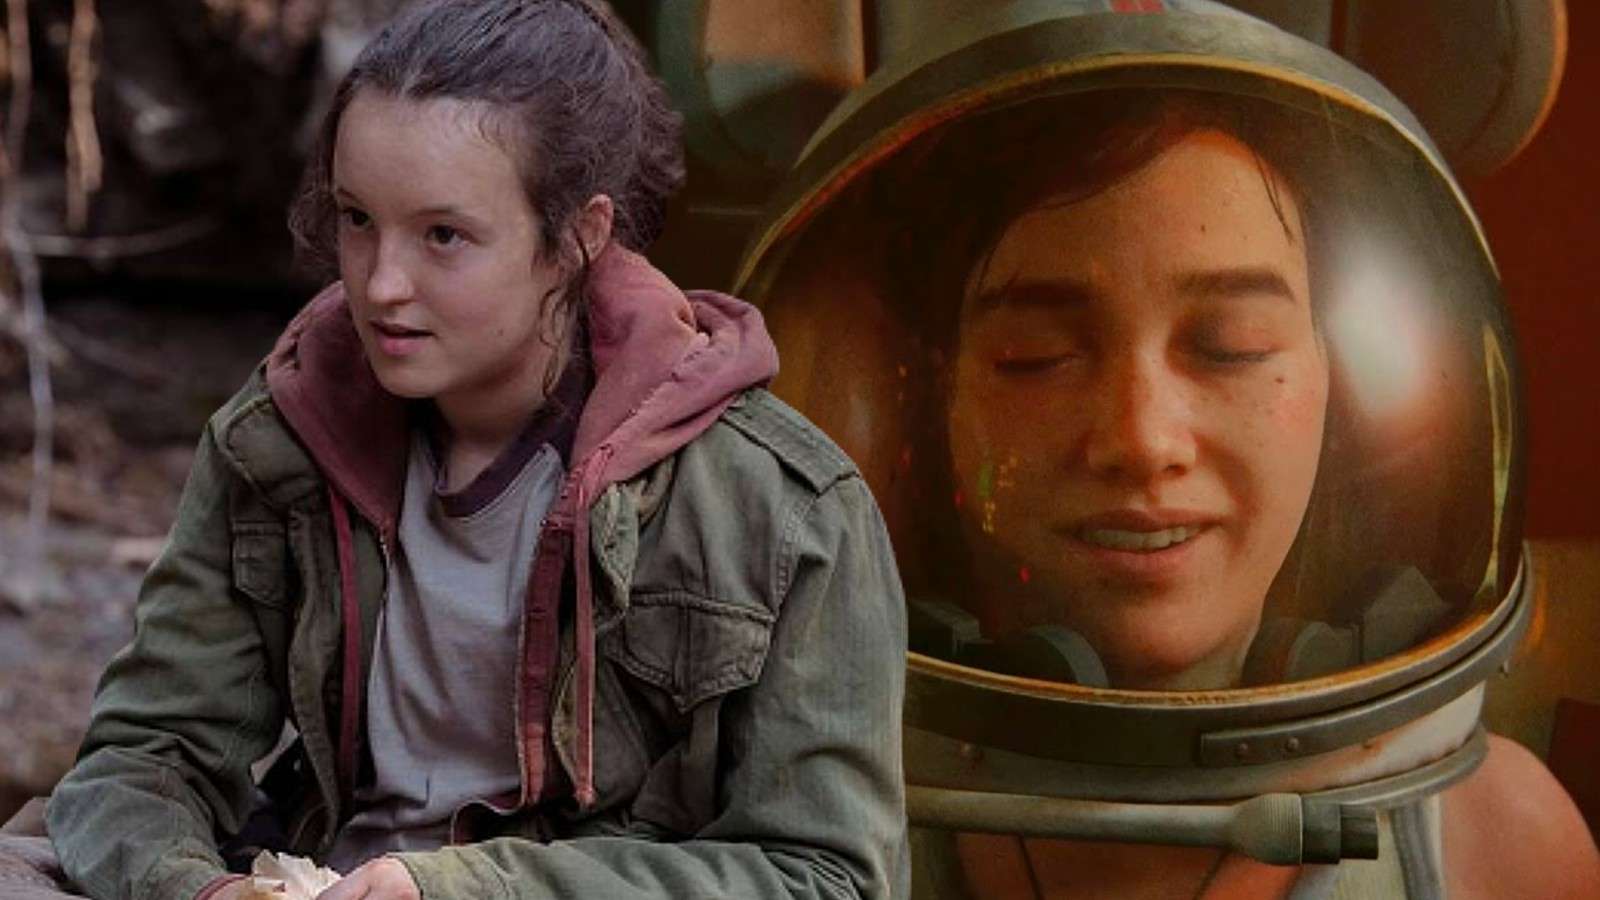 Bella Ramsey in The Last of Us Episode 2 and a still from The Last of Us Part II